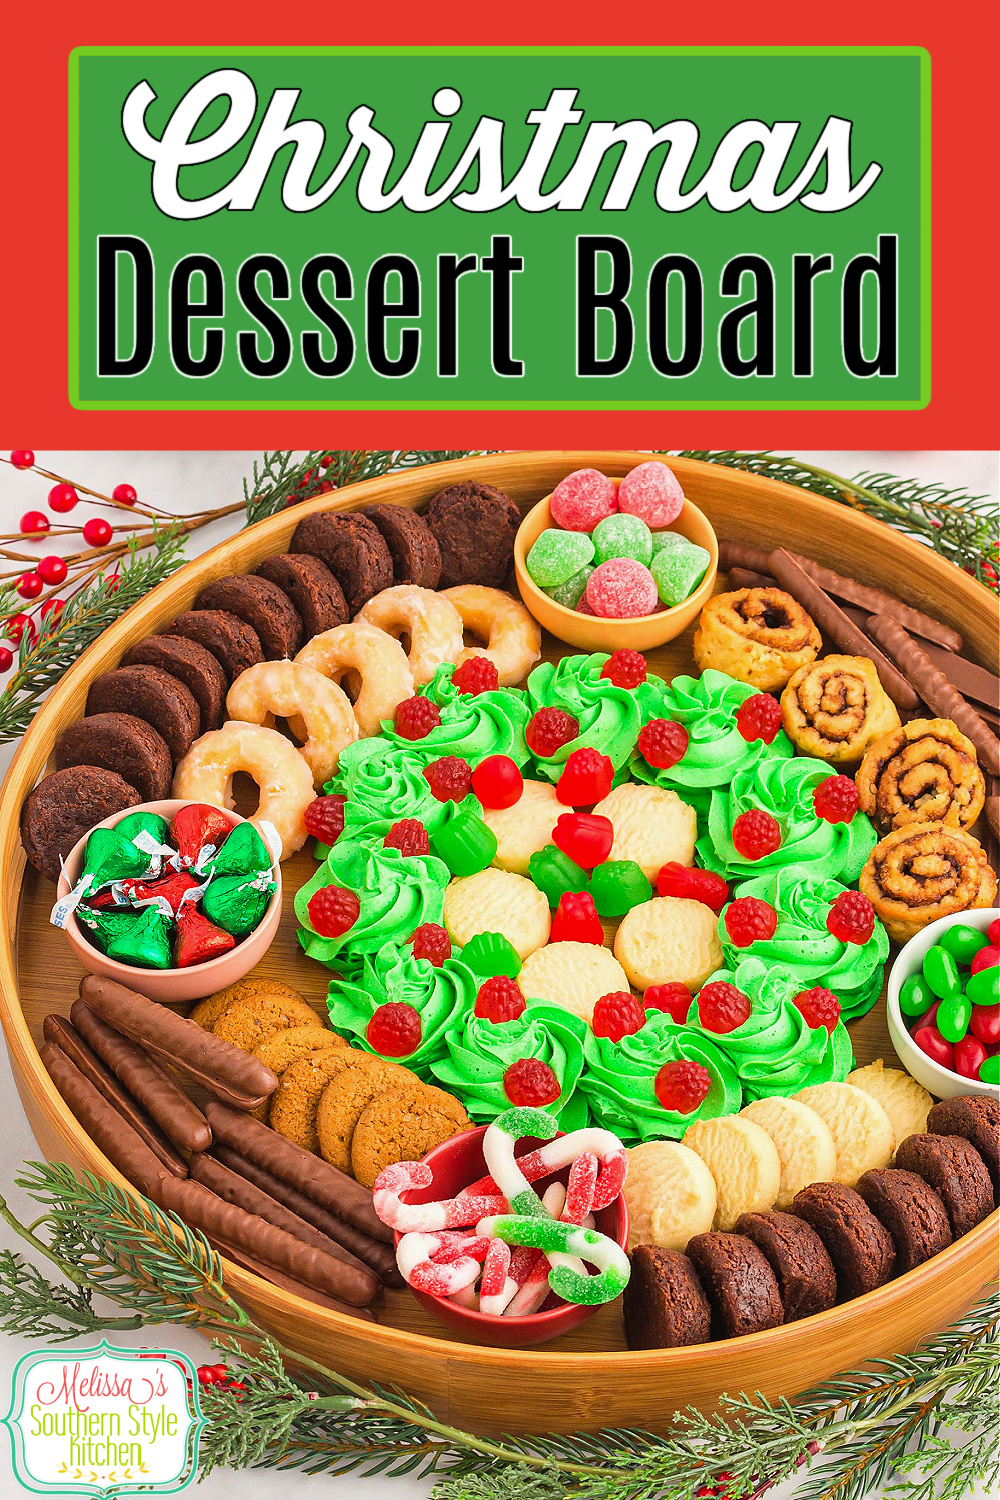 This stunning Christmas Dessert Board features a green tinted homemade buttercream frosting for dipping your favorite cookies and treats. #butterboard #buttercreamfrosting #vanillafrosting #charcuterie #desserts #dessertboard #christmasdesserts #candy #cookies #chocolate via @melissasssk